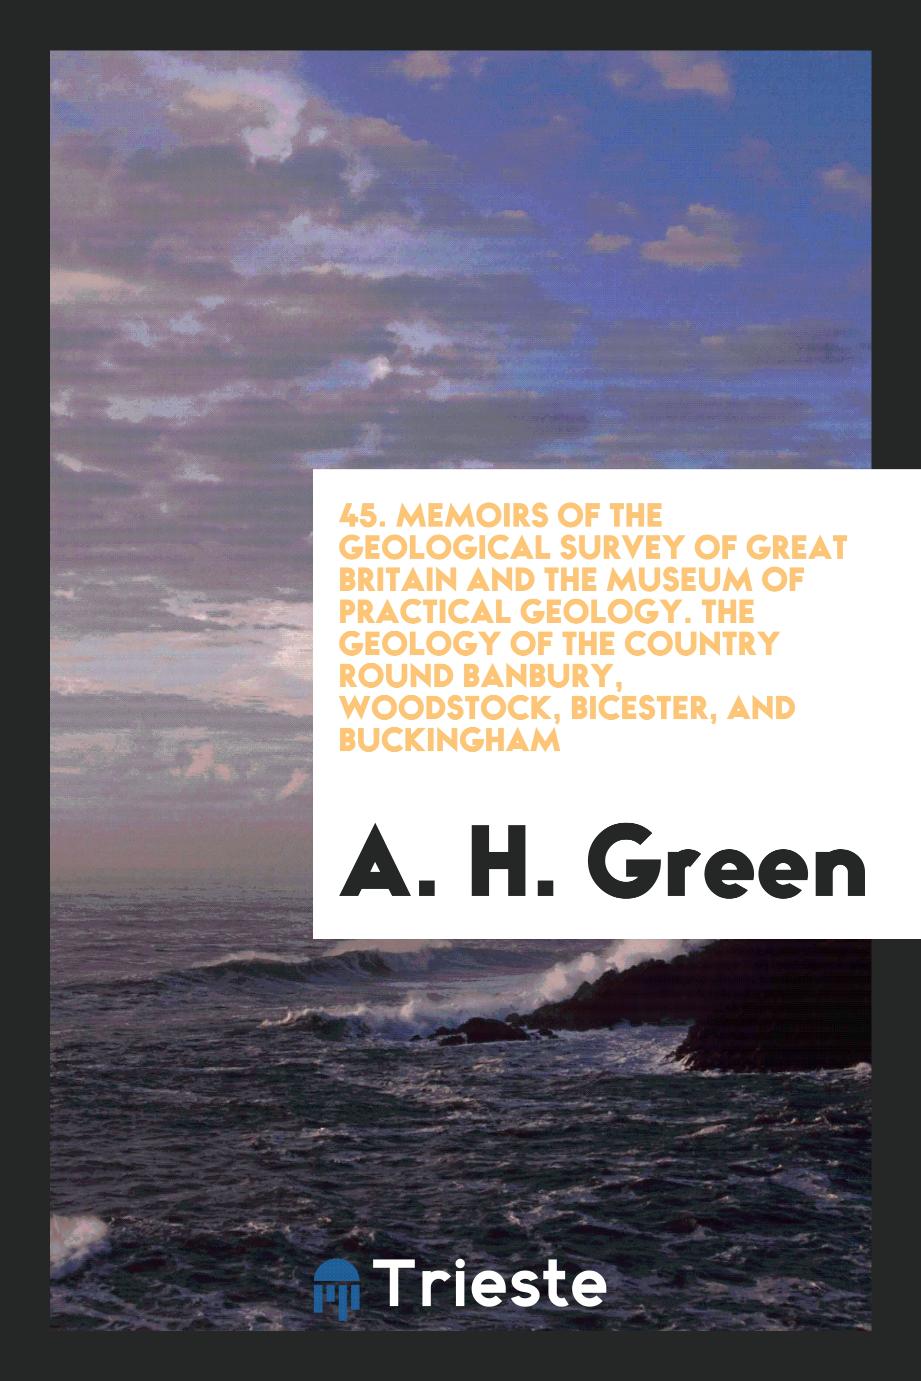 45. Memoirs of the Geological Survey of Great Britain and the Museum of Practical Geology. The geology of the country round Banbury, Woodstock, Bicester, and Buckingham